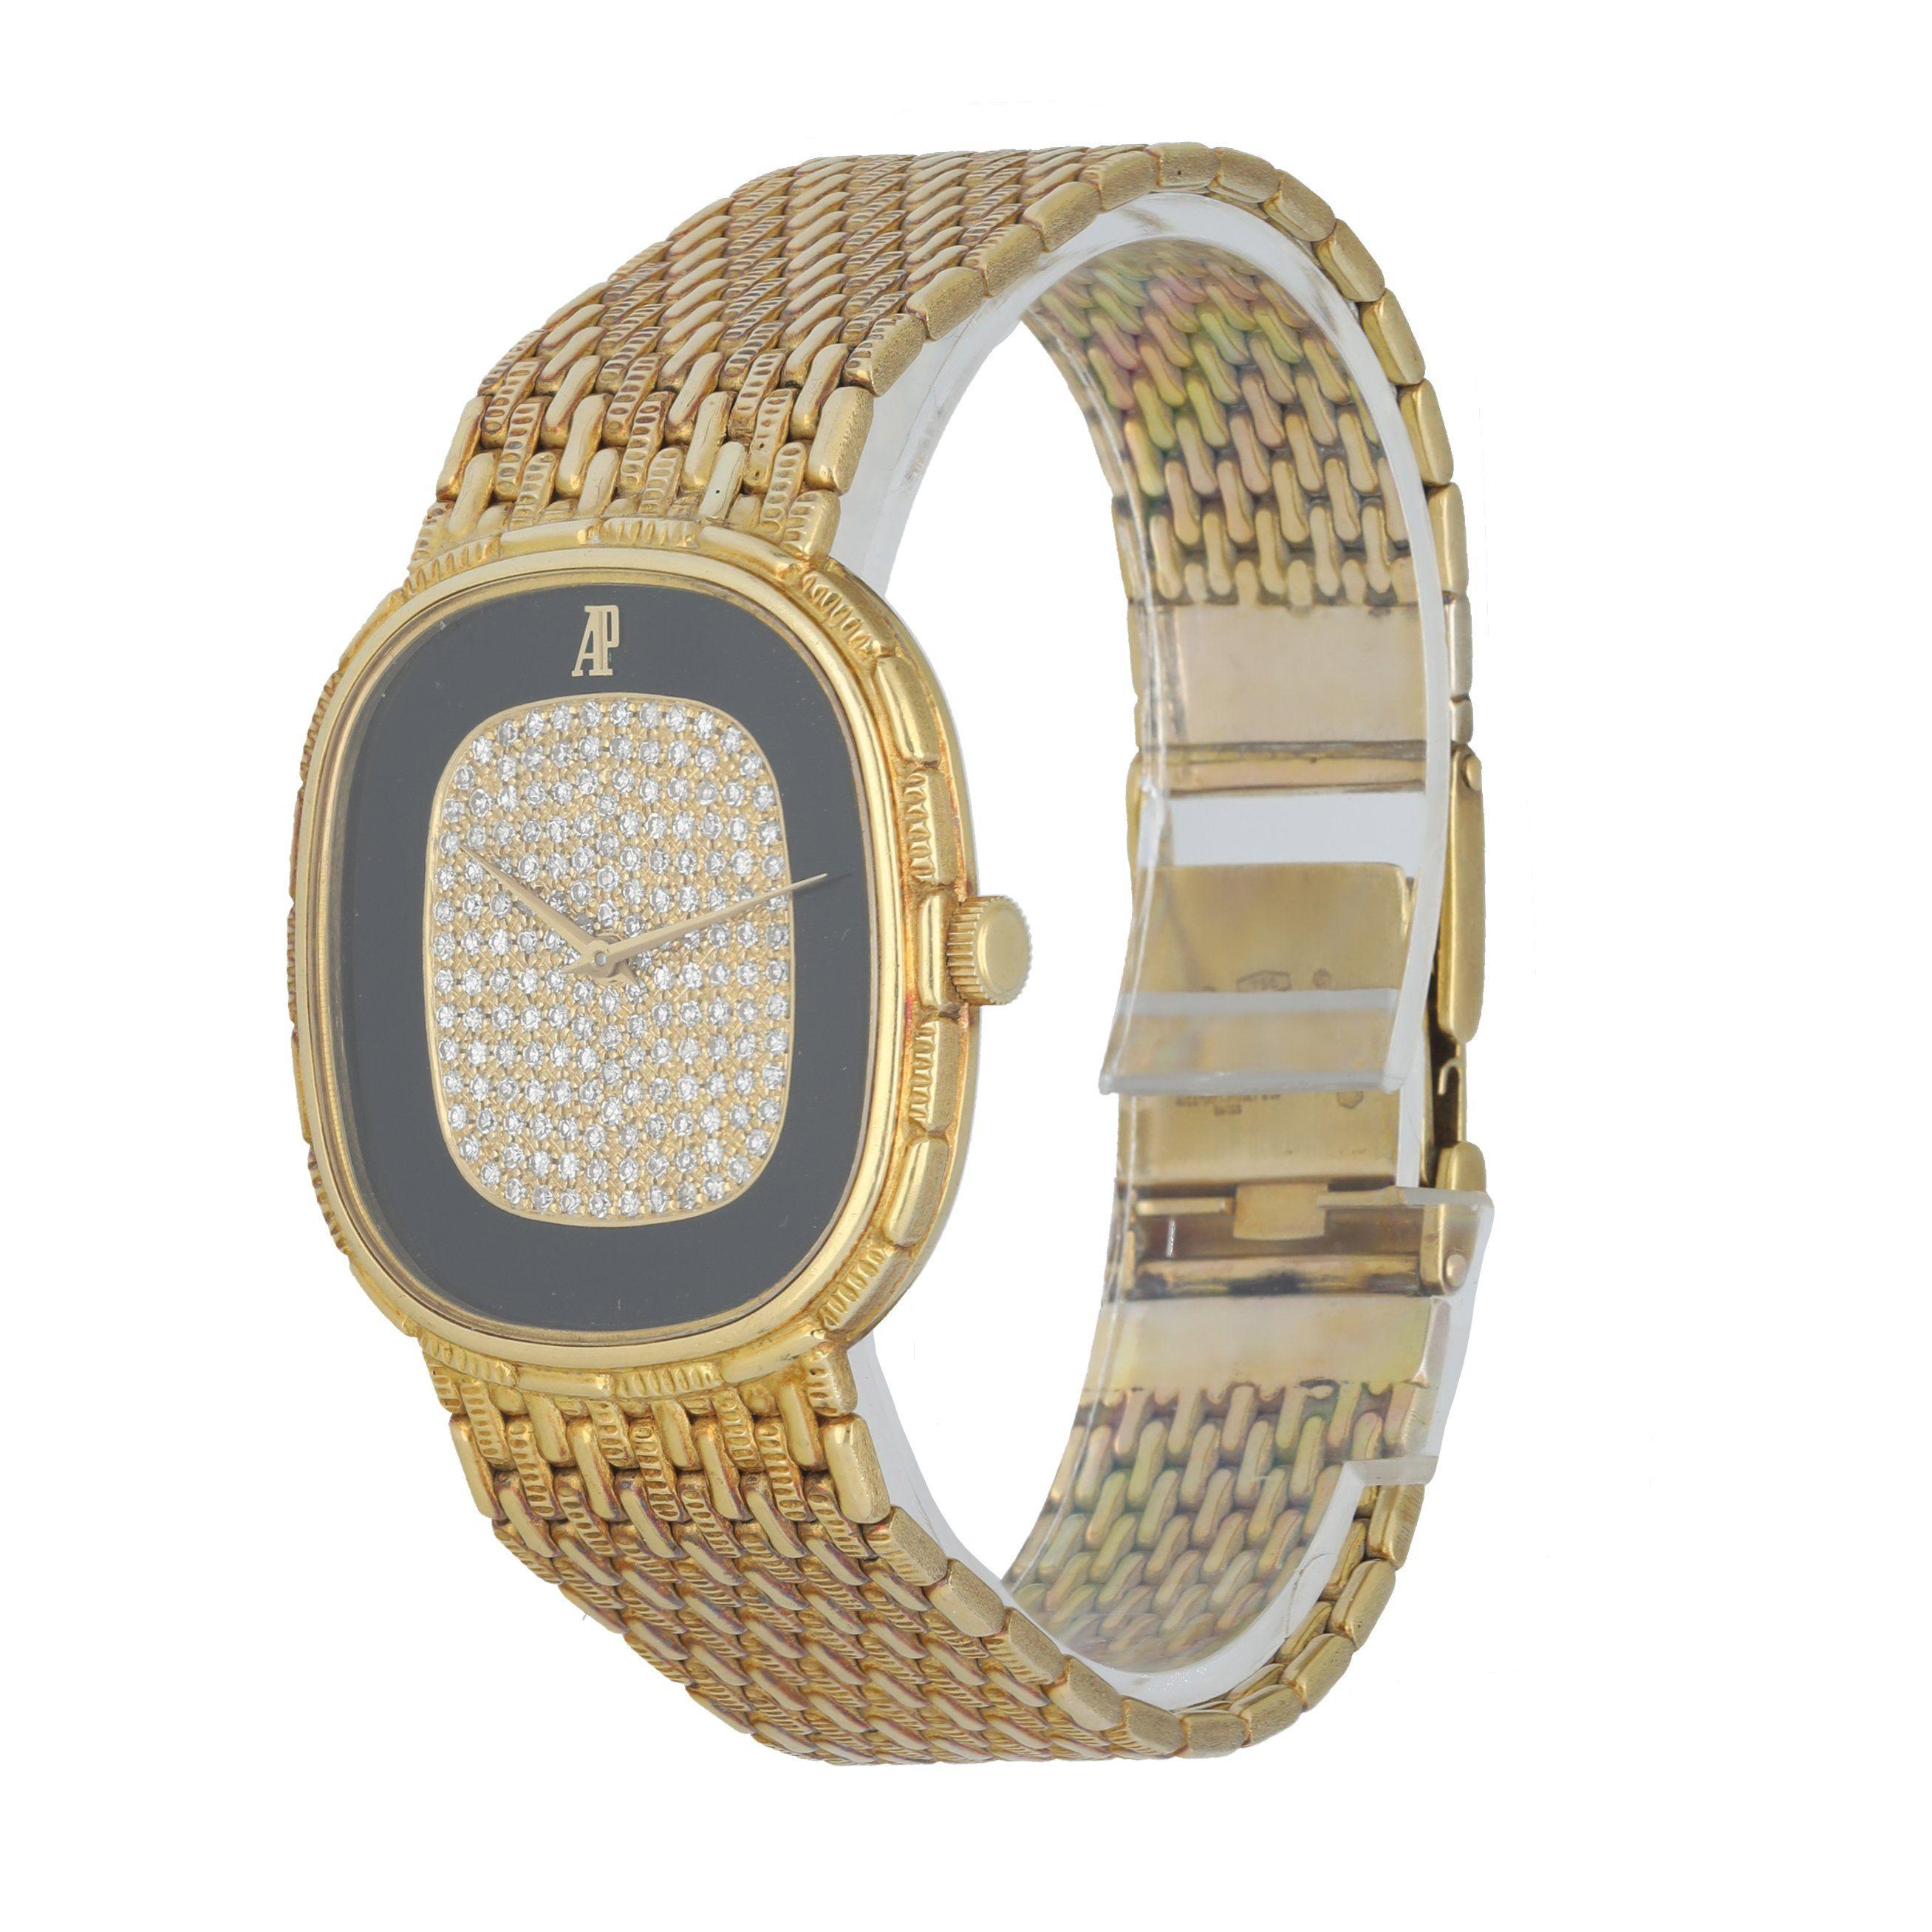  Audemars Piguet watch, 30MM 18K yellow gold case with bezel. Onyx and diamond dial with gold hands. Sapphire crystal and 18K yellow gold case back. 18K Yellow gold bracelet with jewelry clasp. Will fit up to 6-Inch wrist.
 This watch is backed by